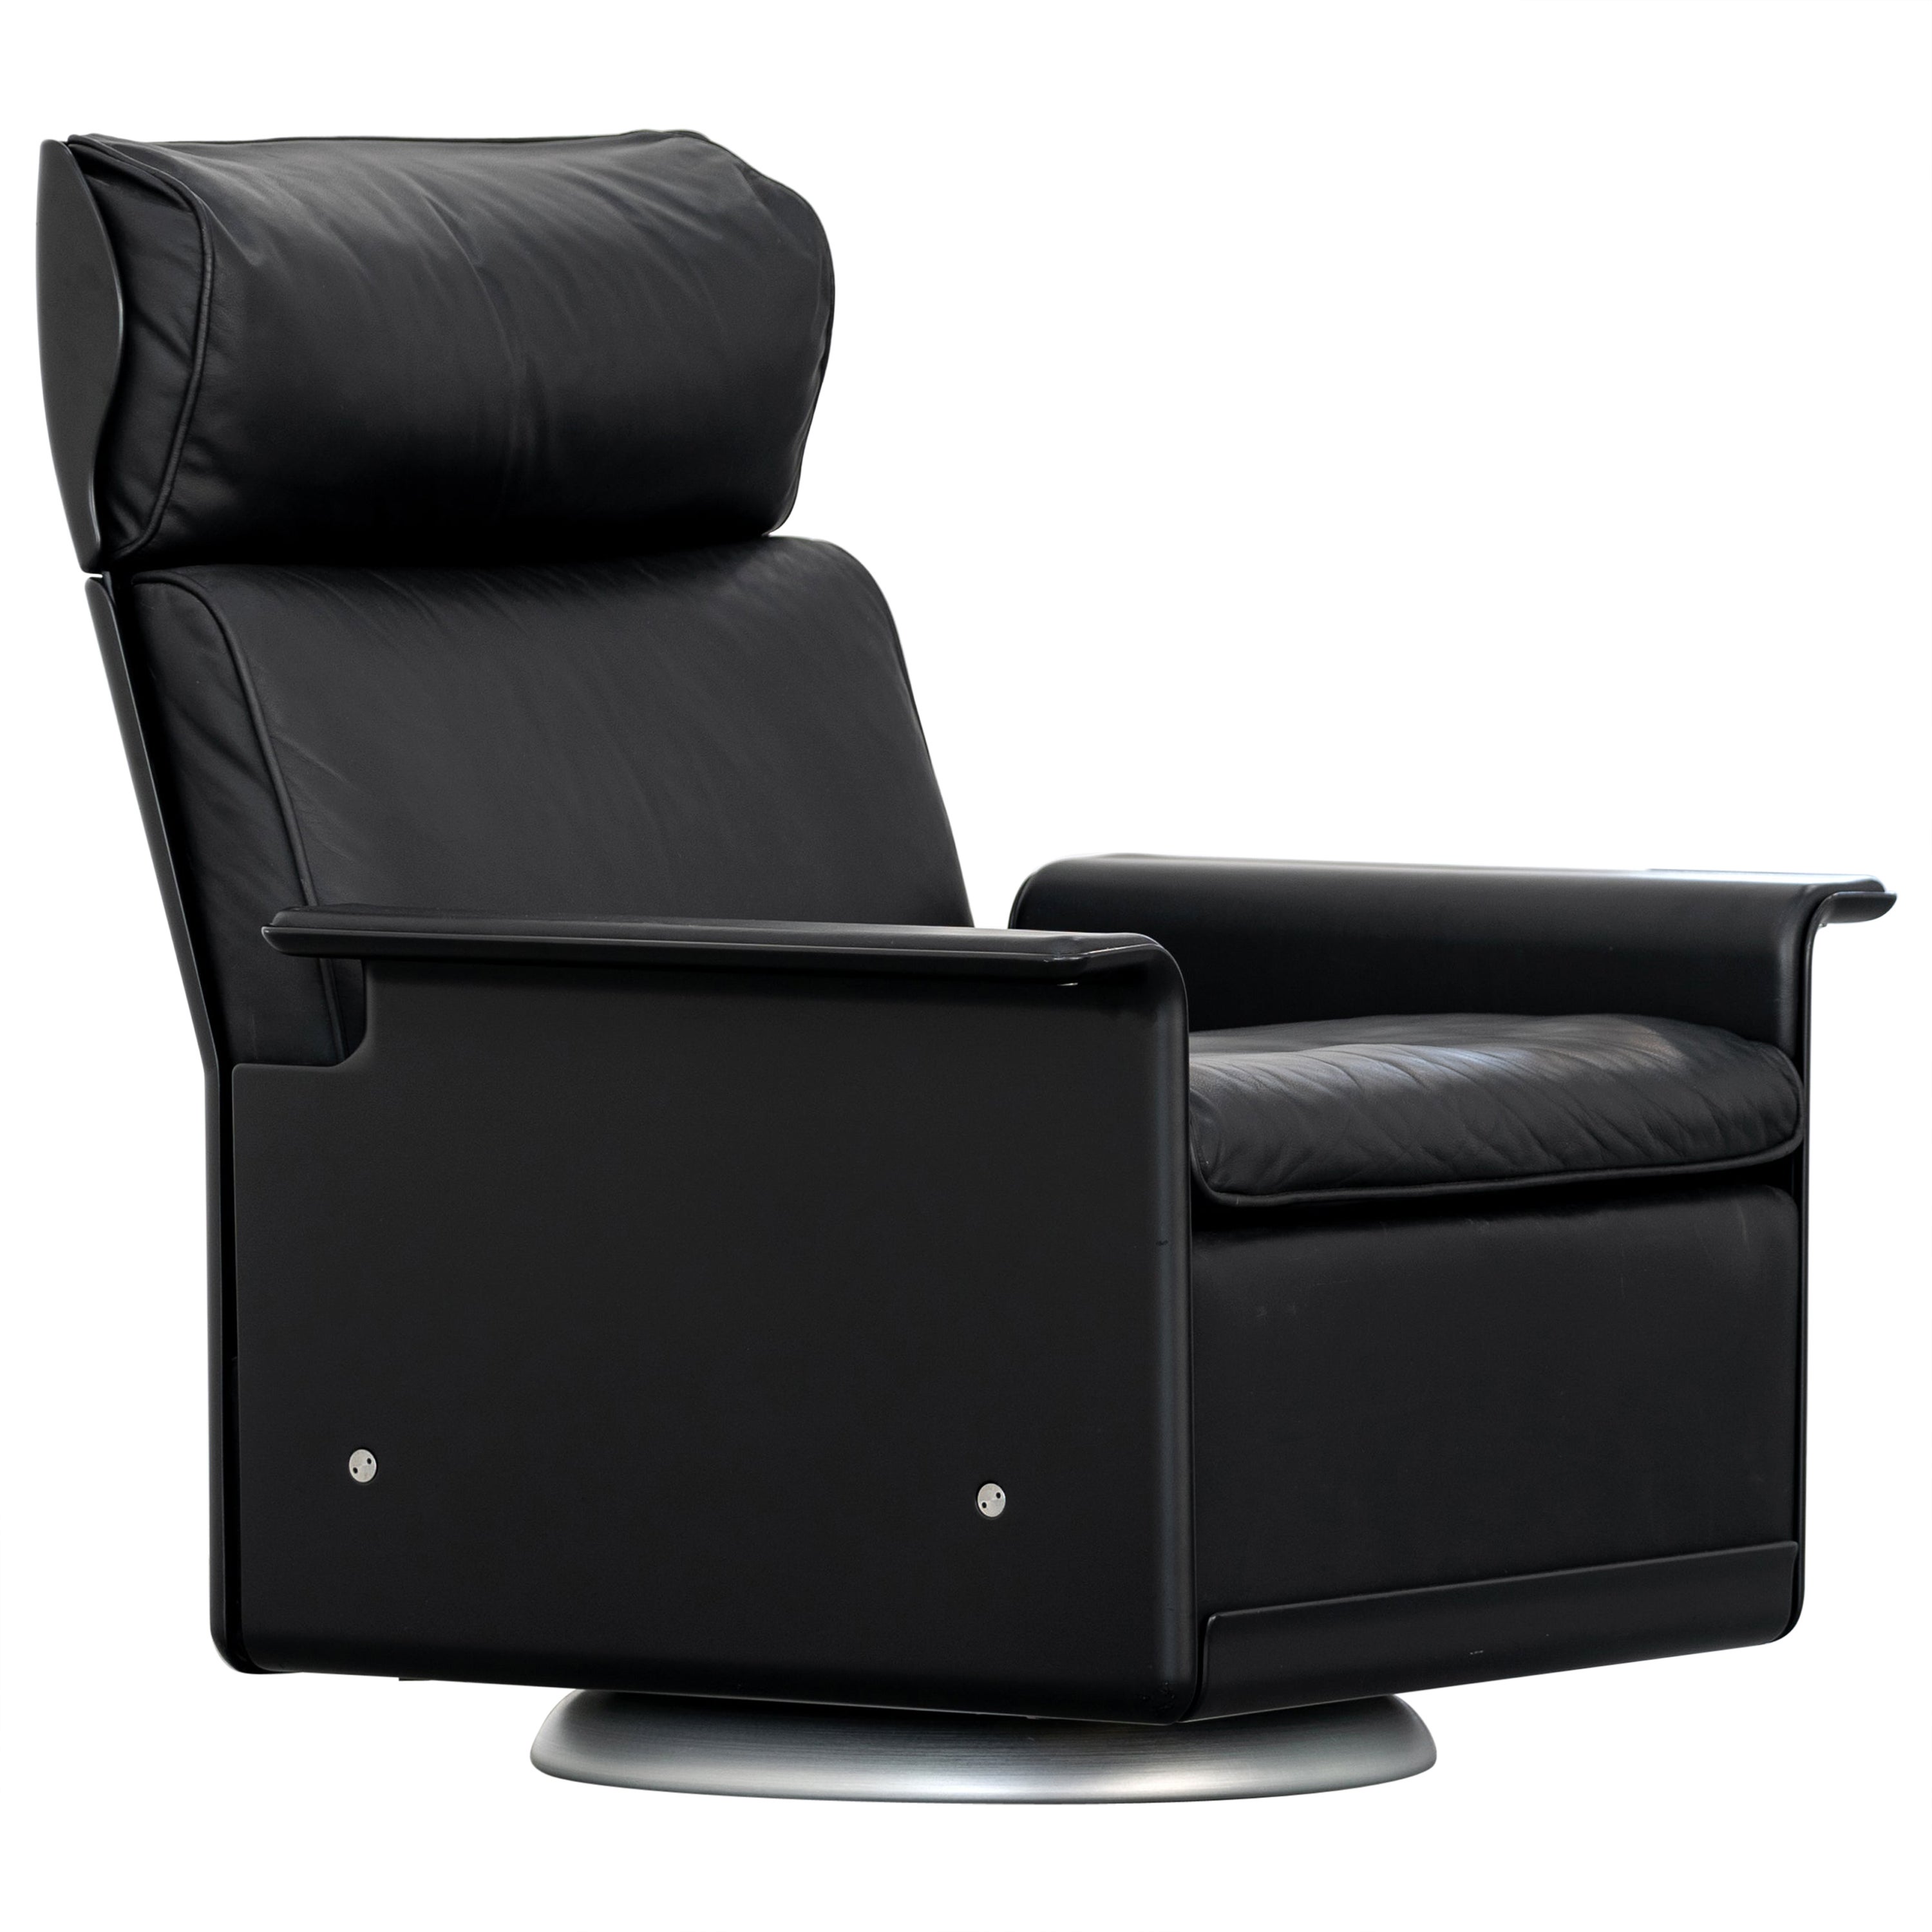 Dieter Rams, 620 Lounge Chair - rare Swivel Base by Vitsœ in black Leather, 1962